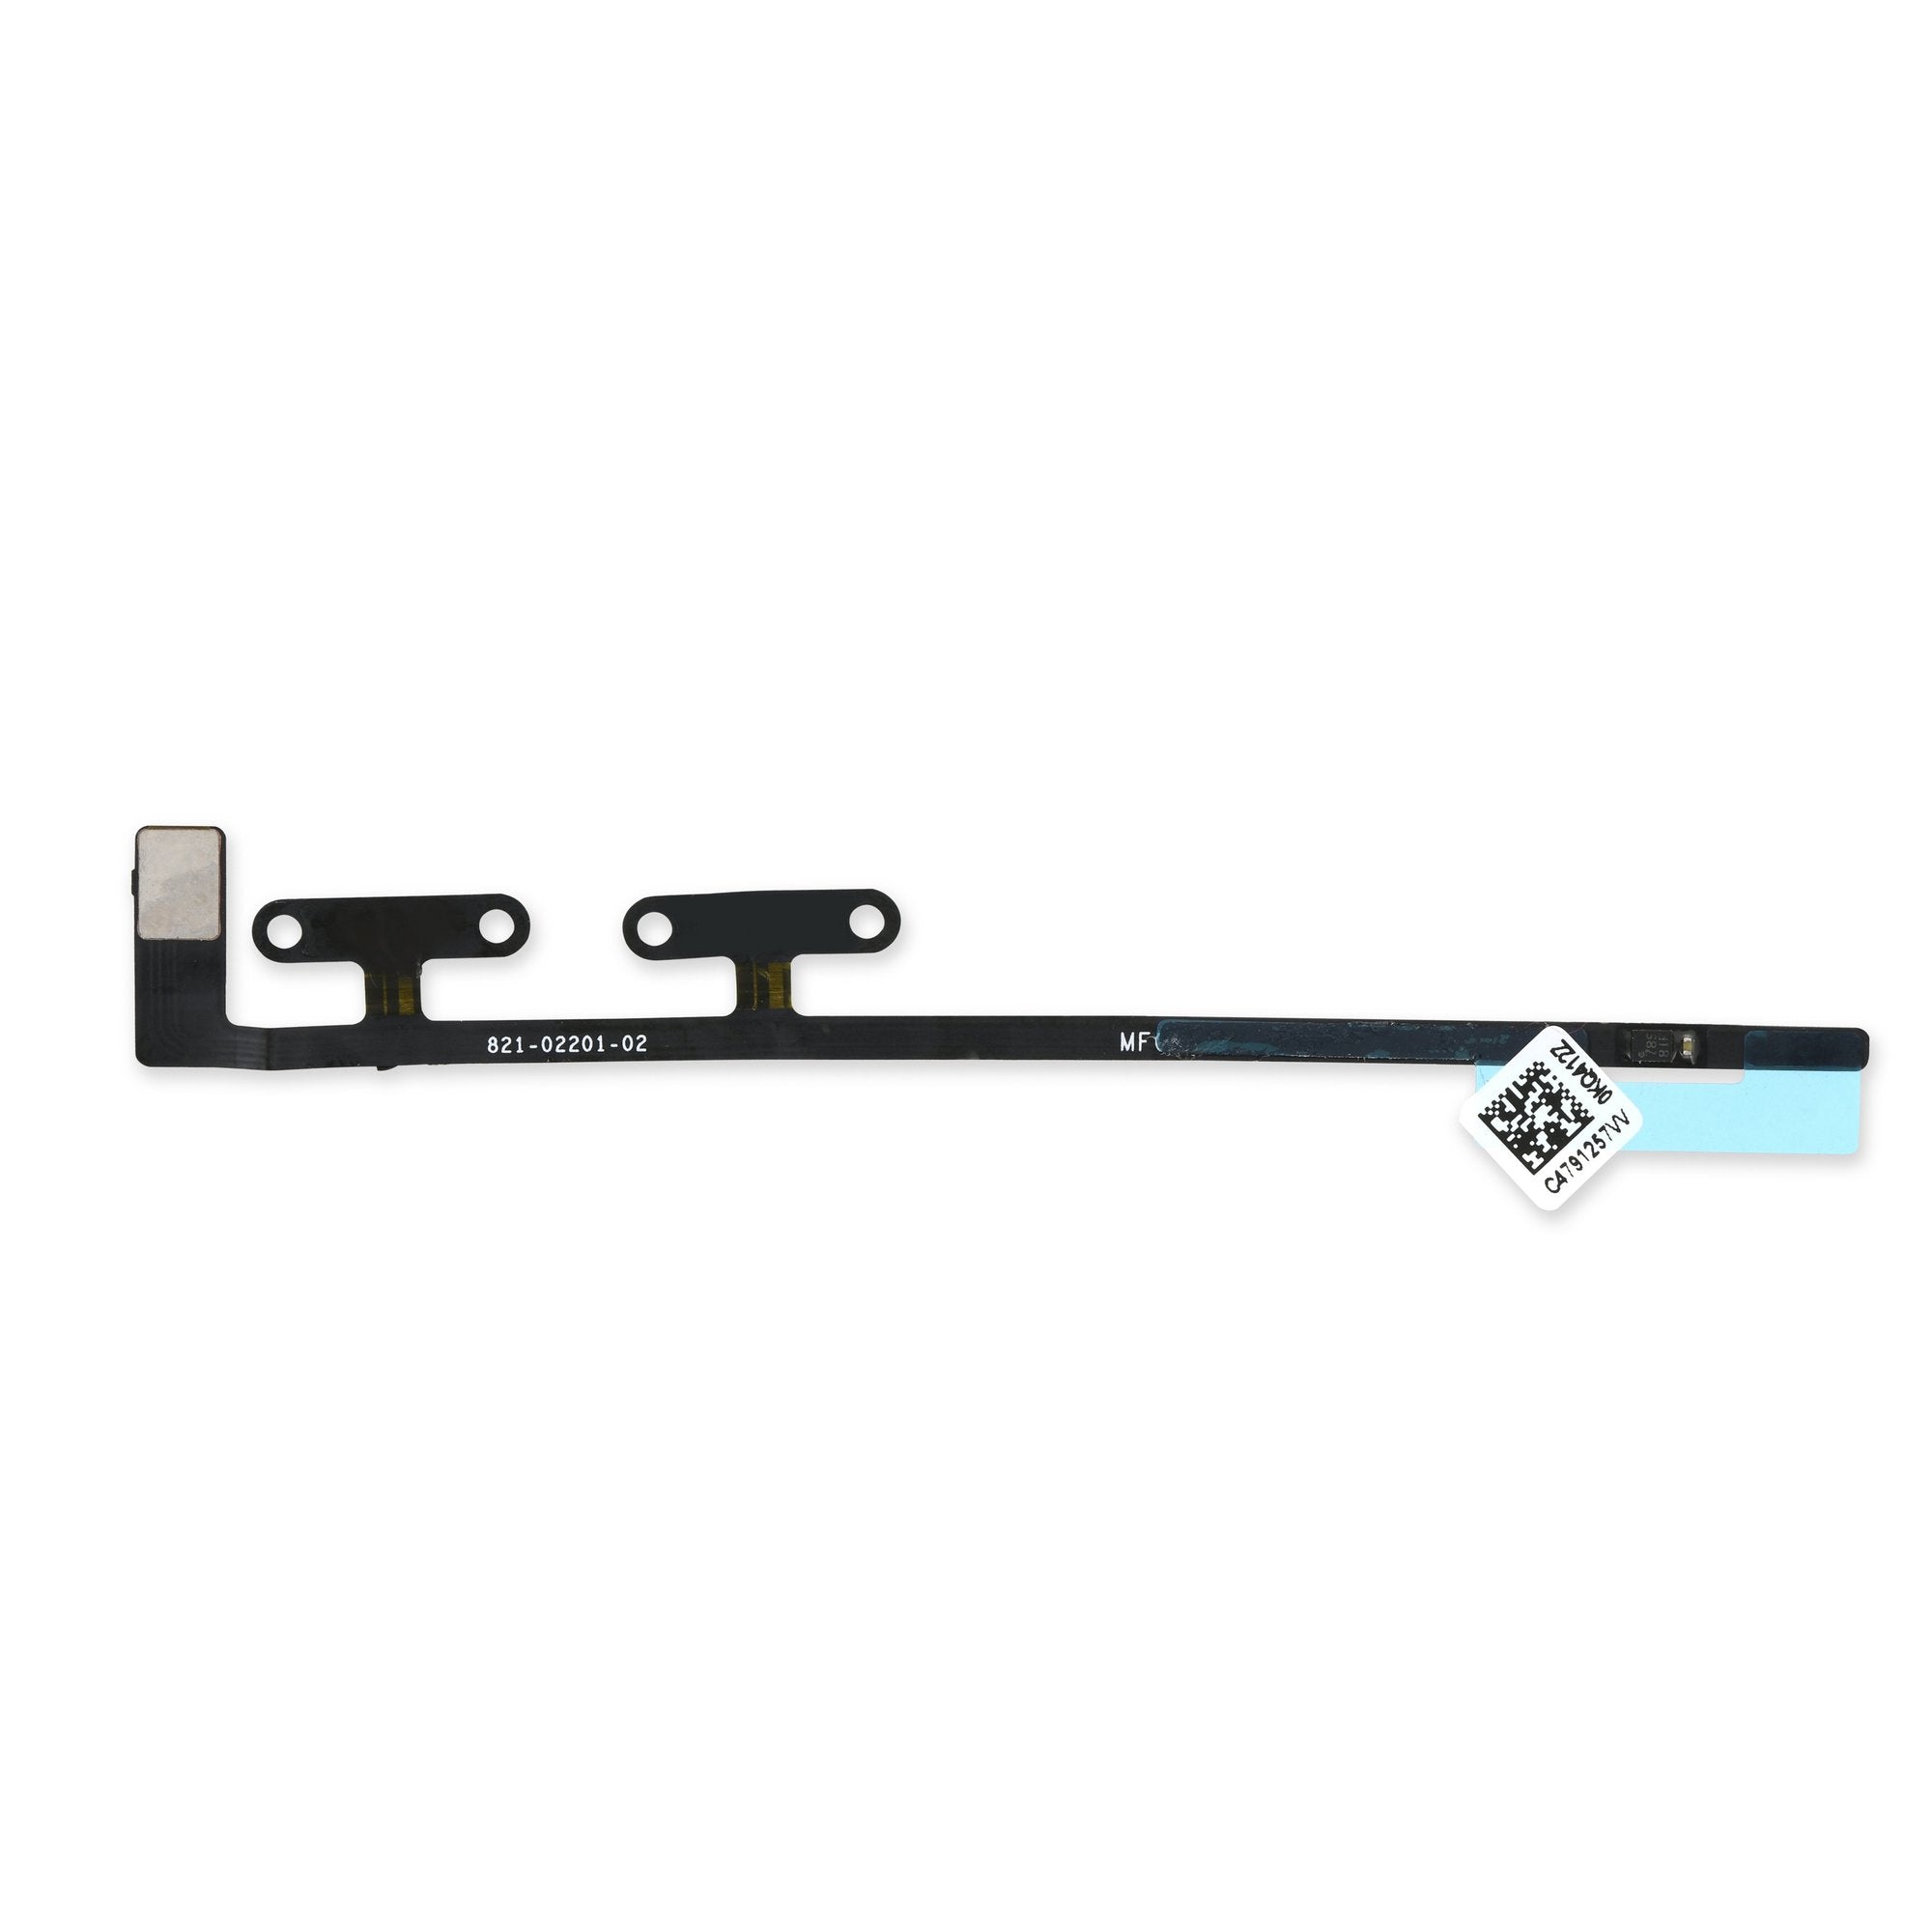 iPad Air 3 Volume Button Cable Used